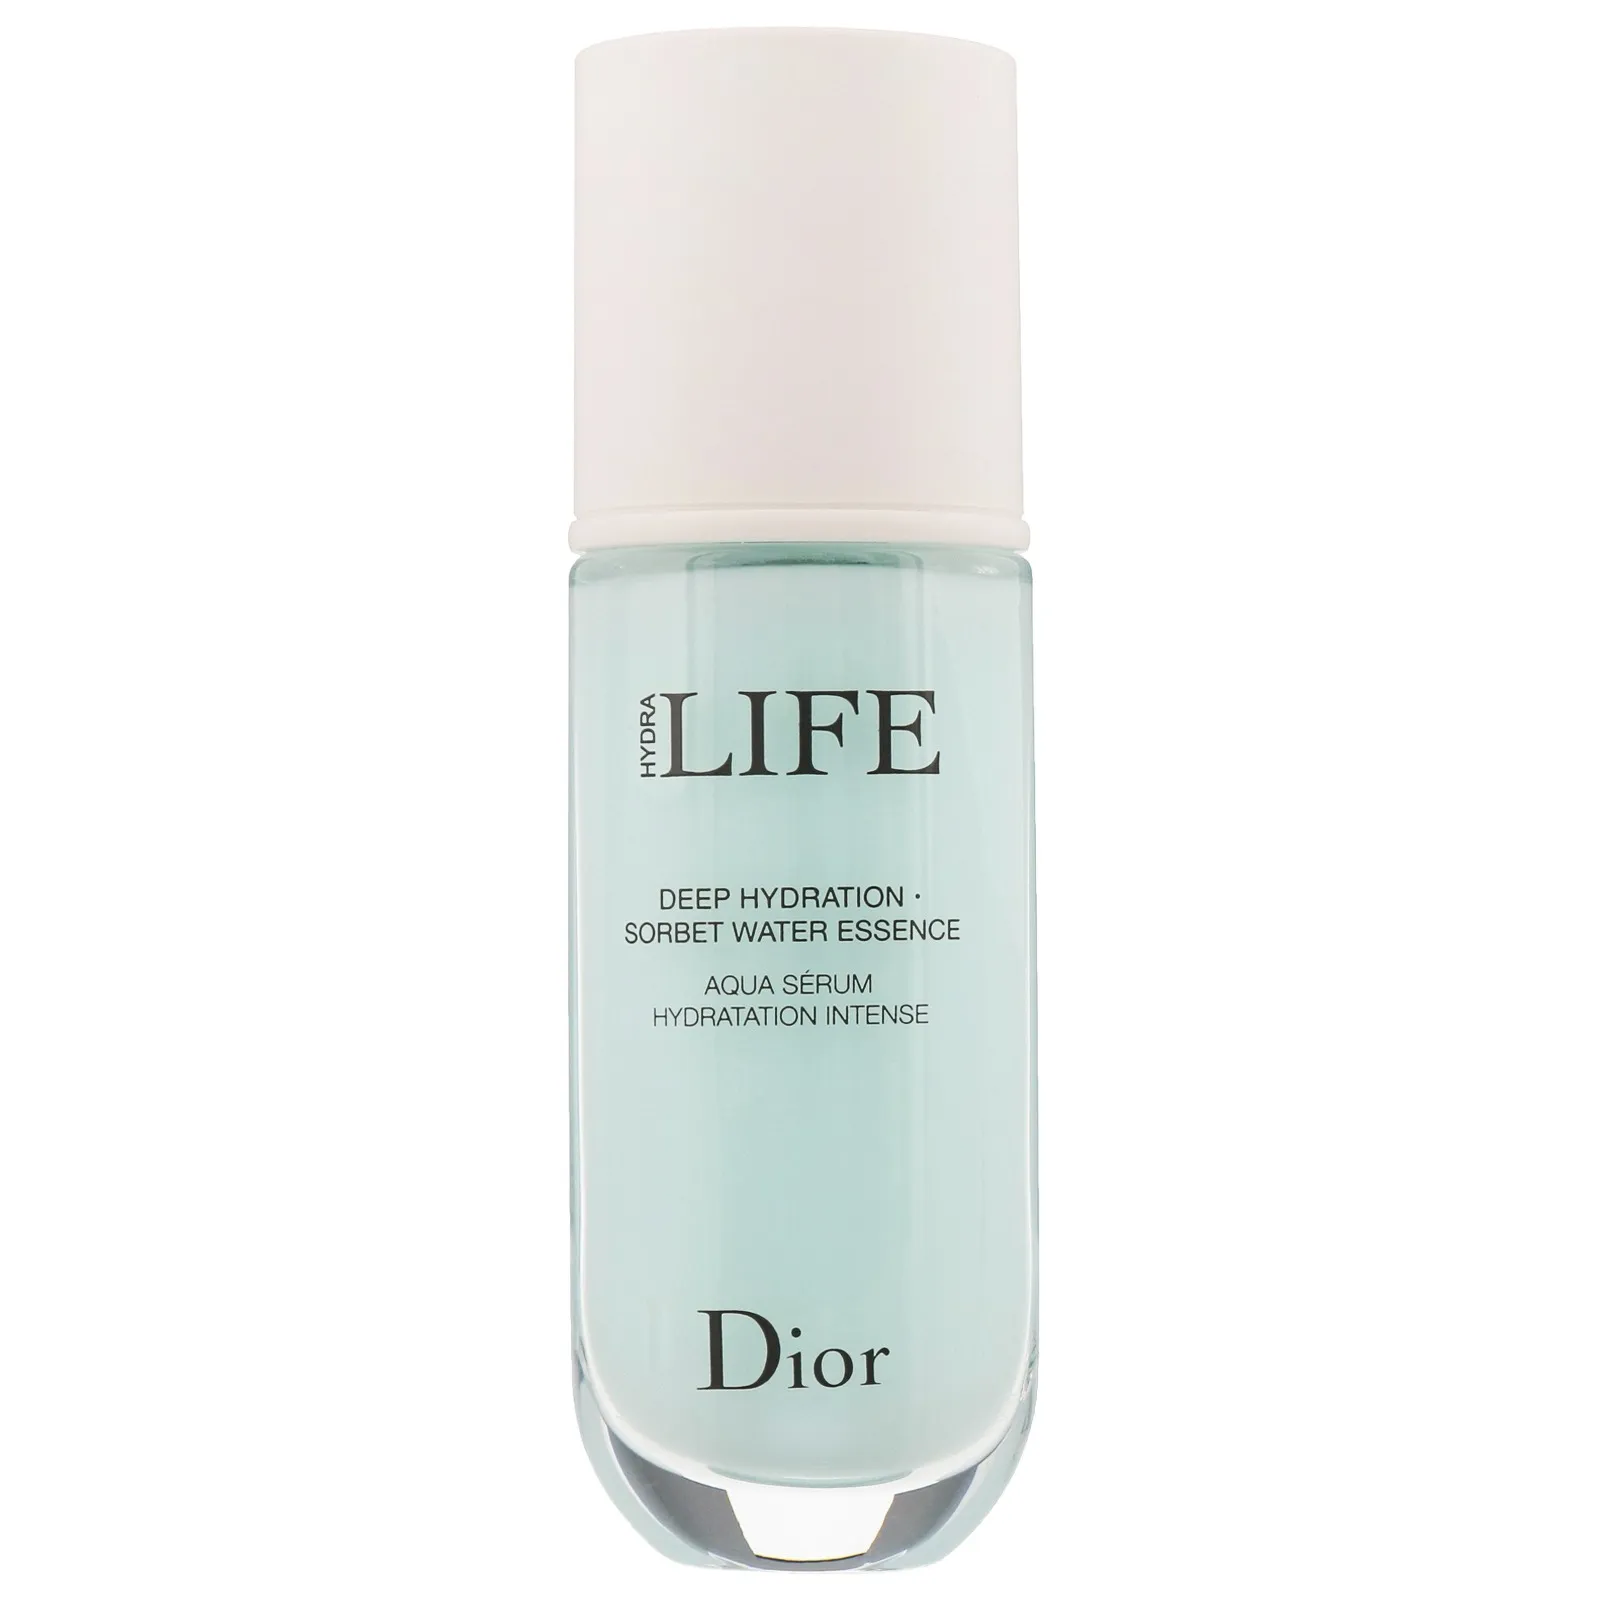 Hydra Life Sorbet Water Essence by Dior, a sorbet water essence that delivers deep hydration.